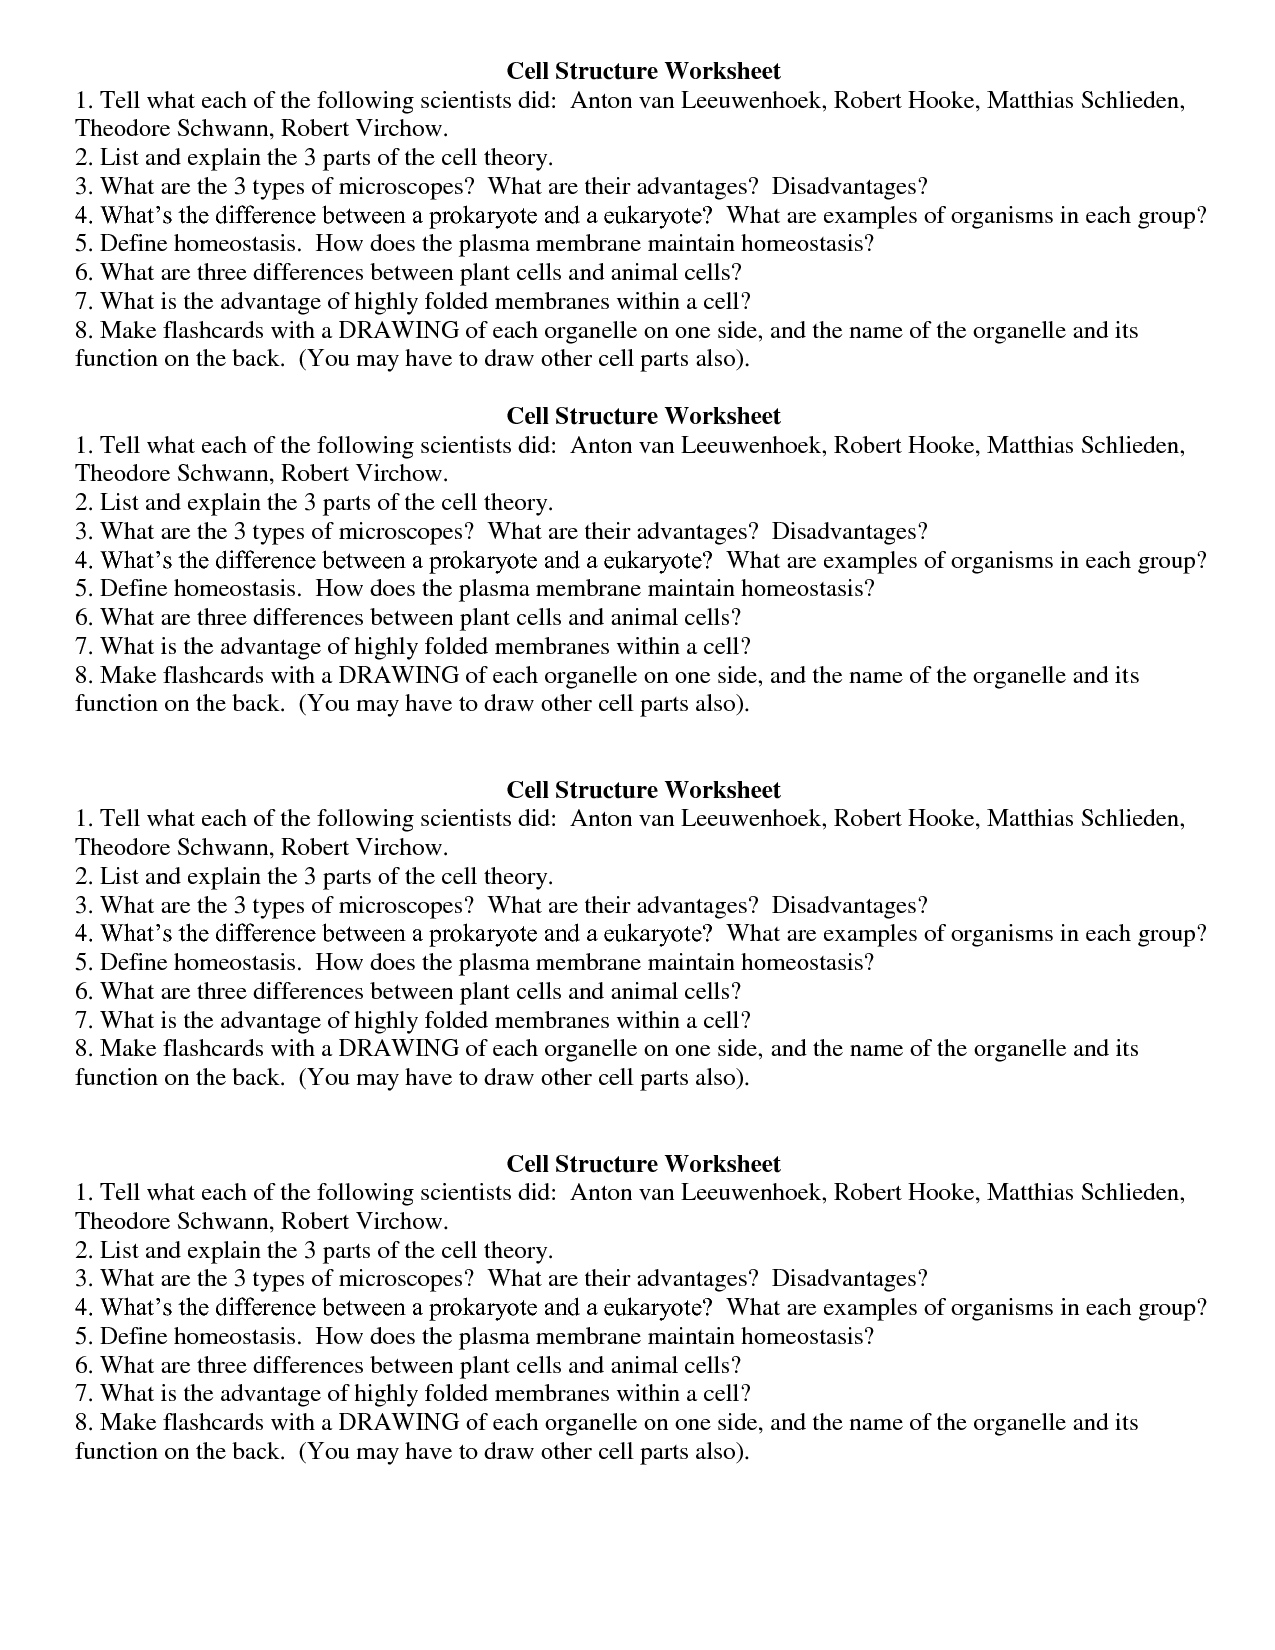 14 Best Images of Plant Cell Structure And Function Worksheet  Cell Structure and Function 